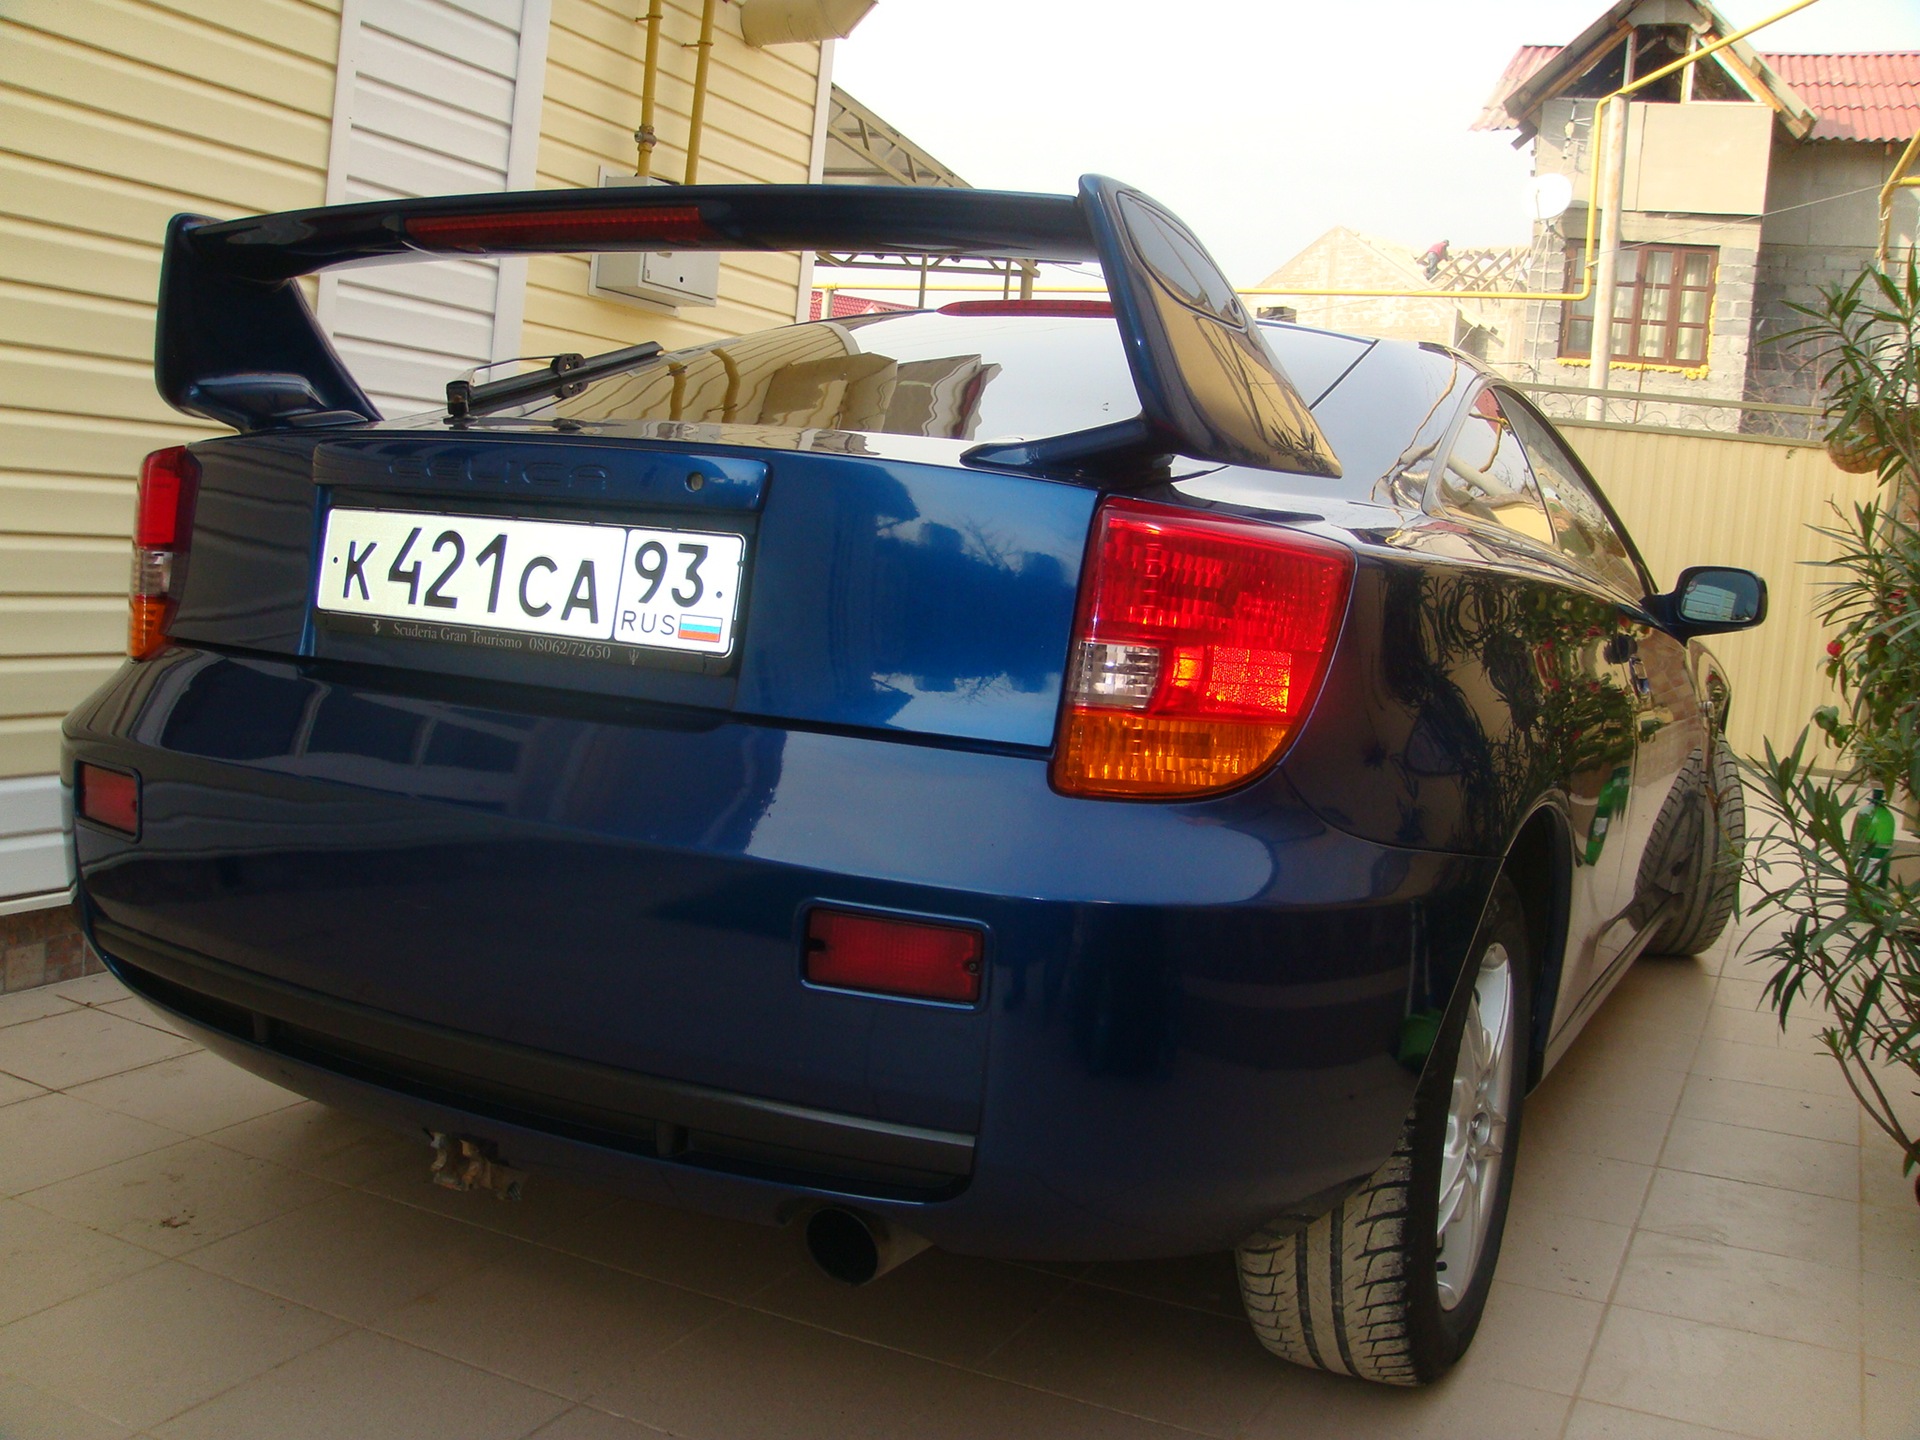 Purchase and installation of a turbojet spoiler - Toyota Celica 18 L 2000